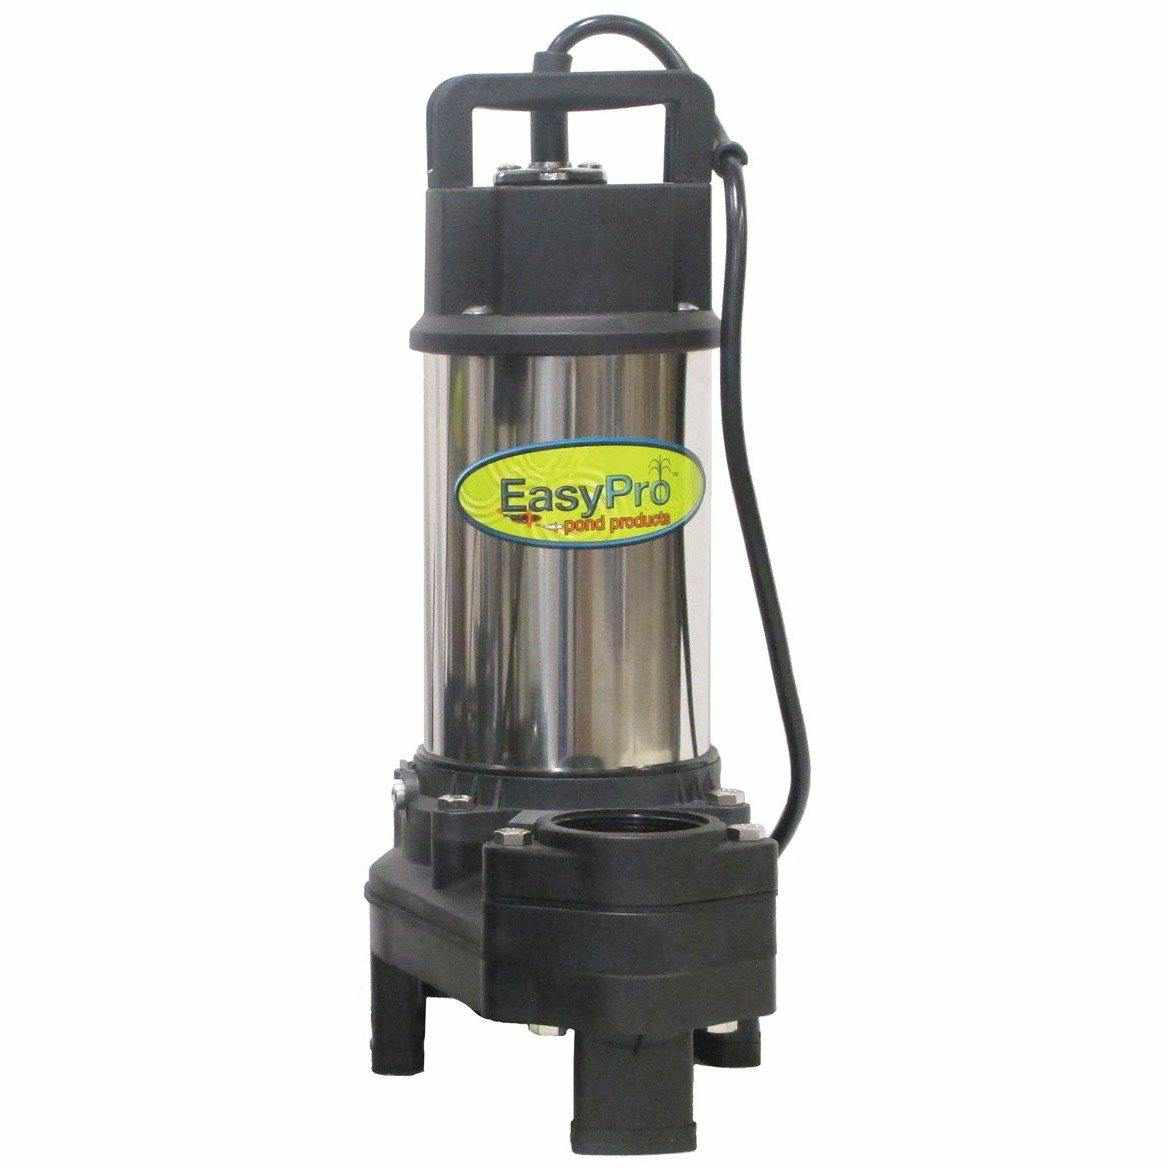 EasyPro TH400 5100 GPH 115V Stainless Steel Submersible Pump - American Pond Supplies Easy Pro EasyPro 5100 GPH Stainless Steel TH400 Submersible Pump Submersible Pumps Submersible Pumps